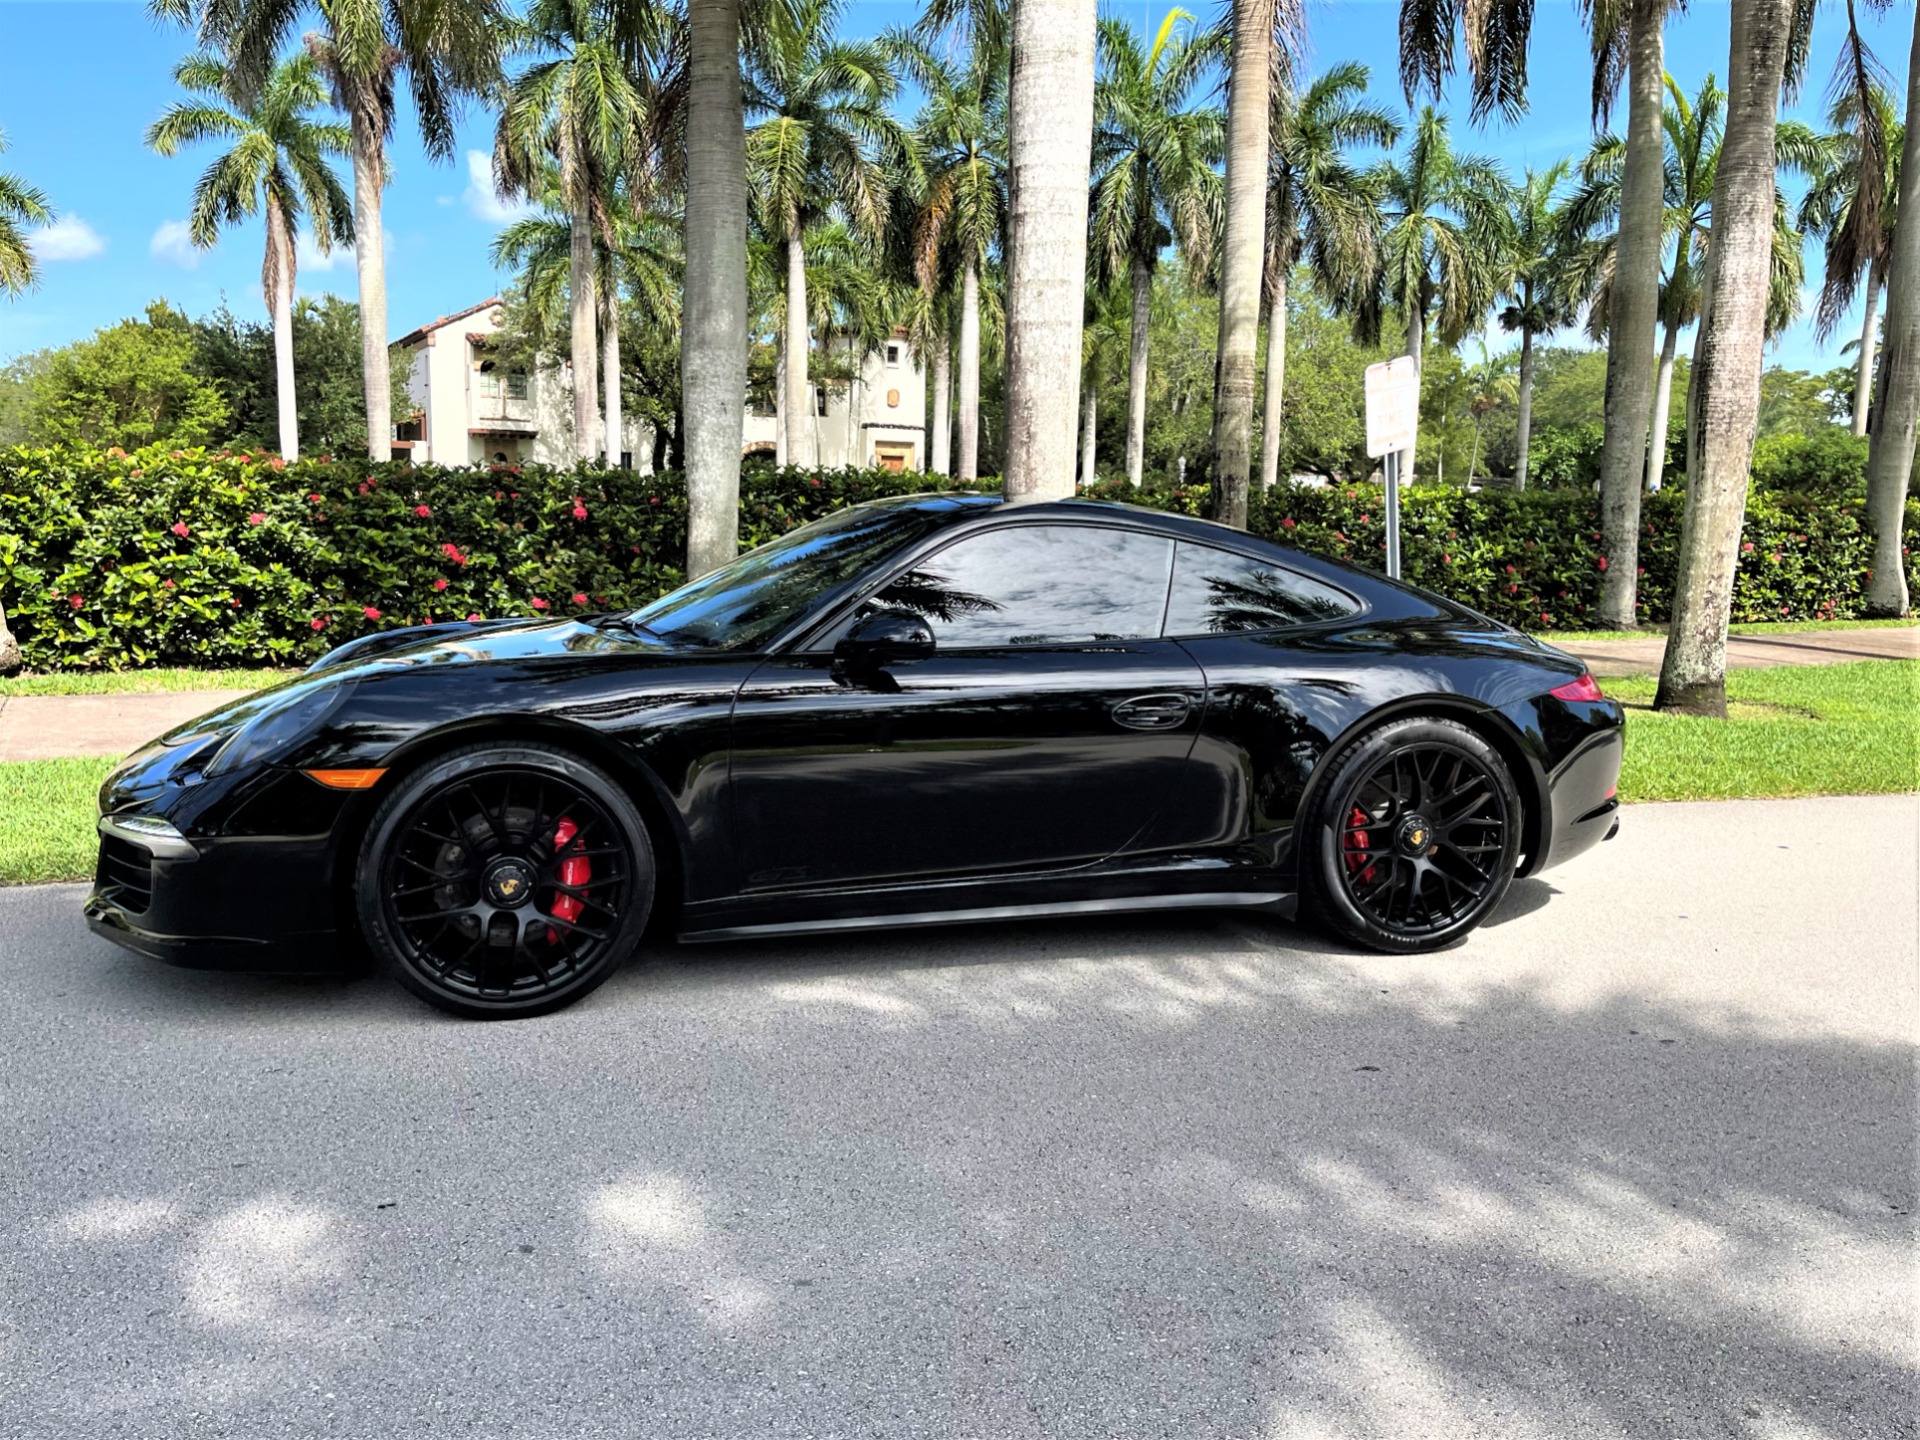 Used 2016 Porsche 911 Carrera 4 GTS for sale $134,850 at The Gables Sports Cars in Miami FL 33146 3